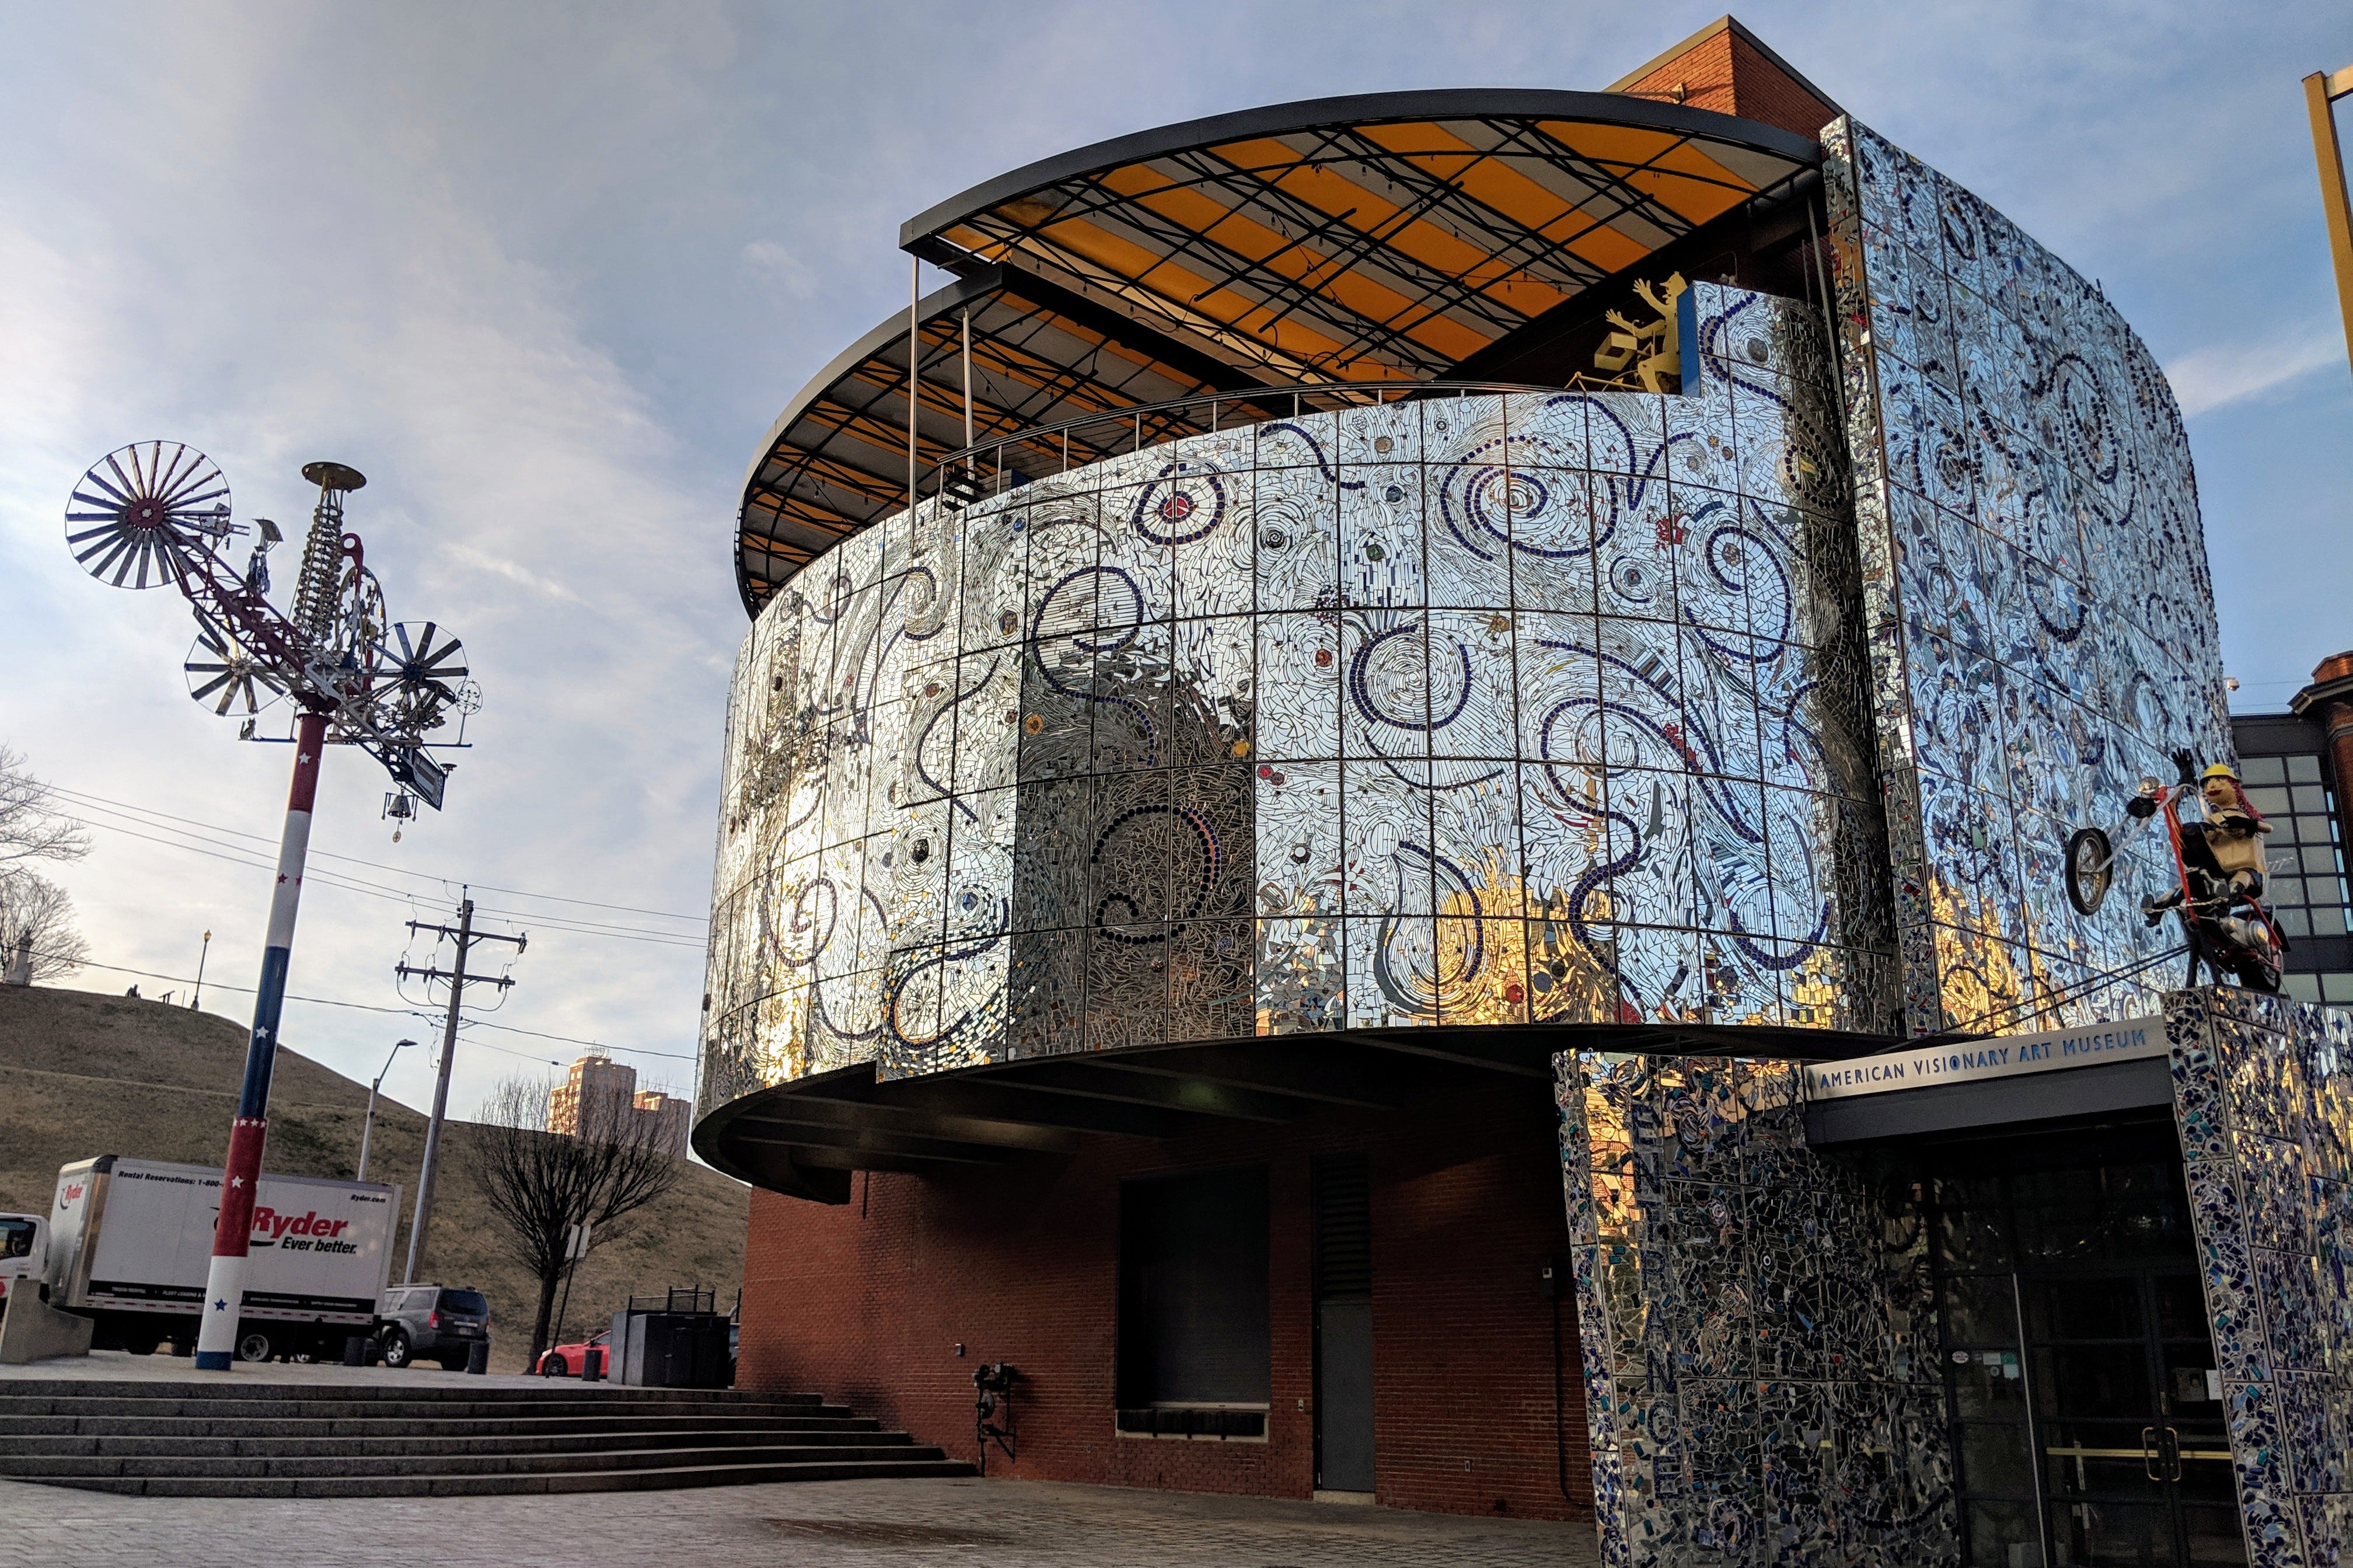 Best Things To Do In Baltimore - The American Visionary Art Museum